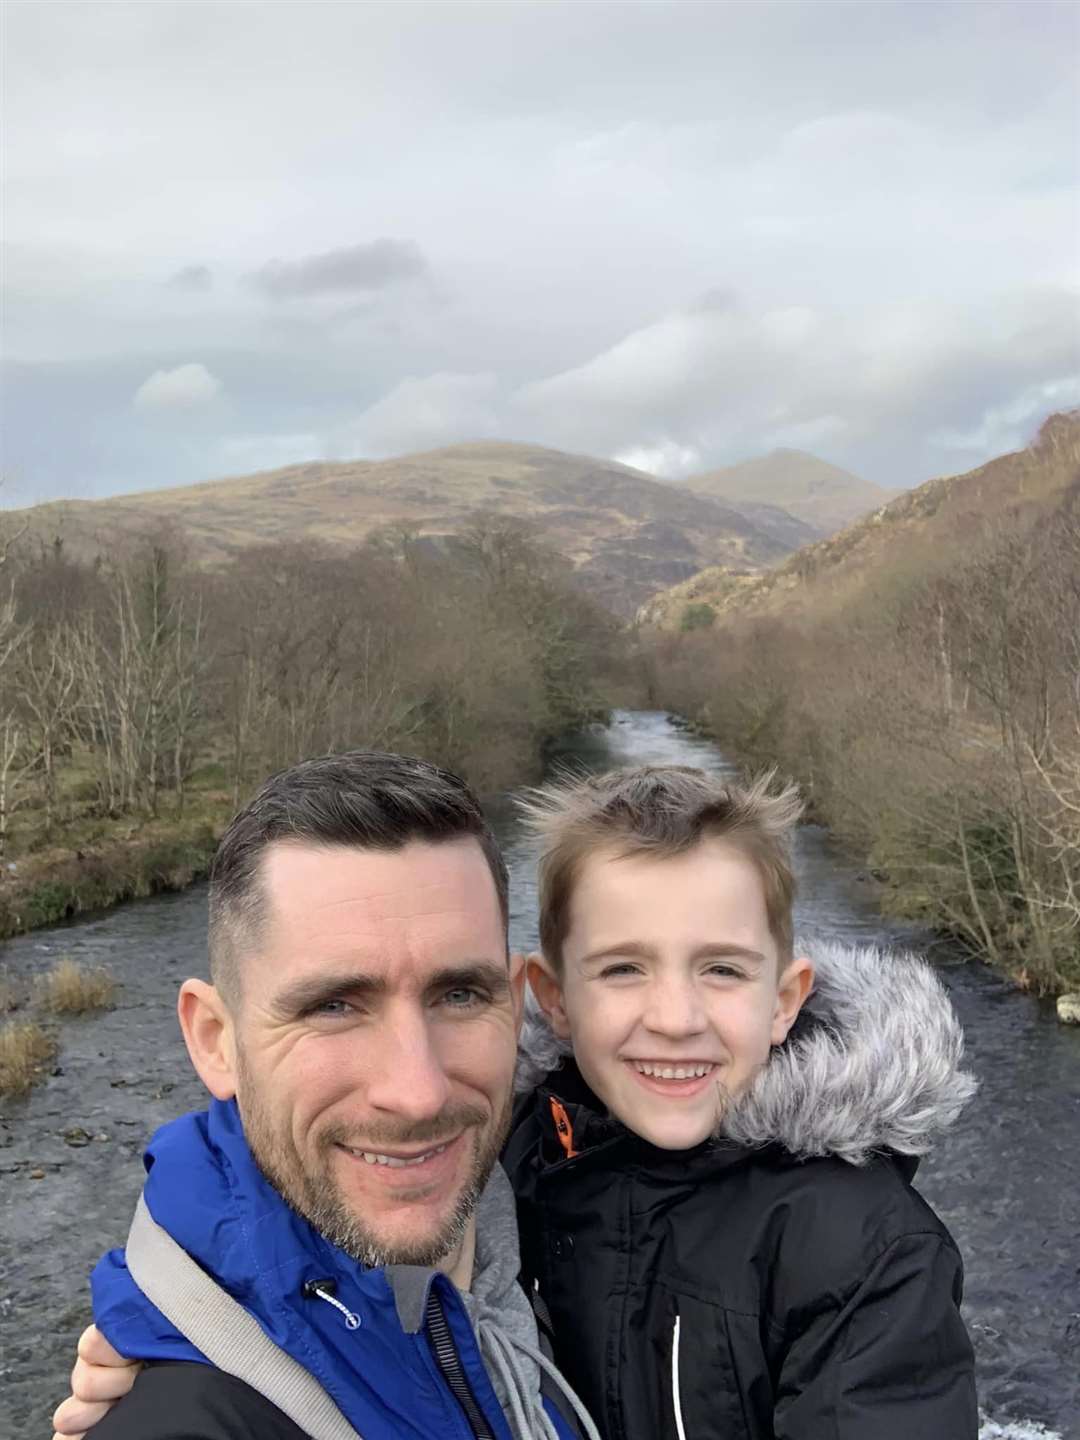 Matt Burrow (left) with son, Oscar, who hiked across mountains in the UK to raise money for a hospice (Matt Burrow/PA)